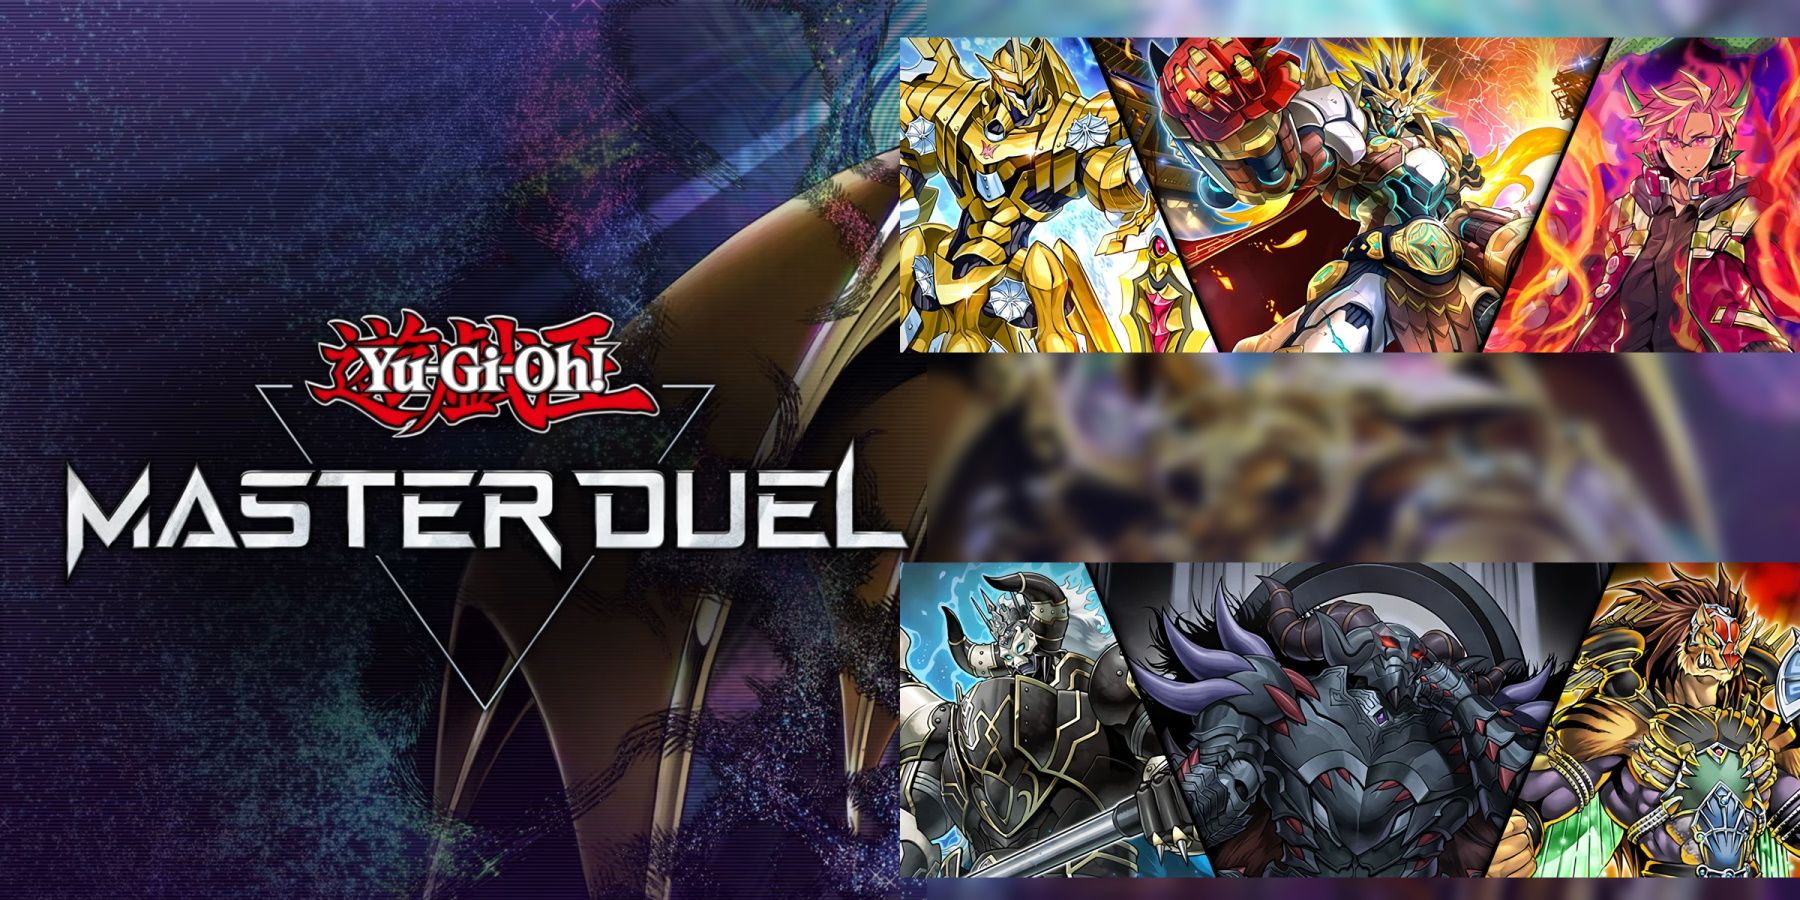 yugioh-master-duel-new-selection-pack-heroic-warriors-story